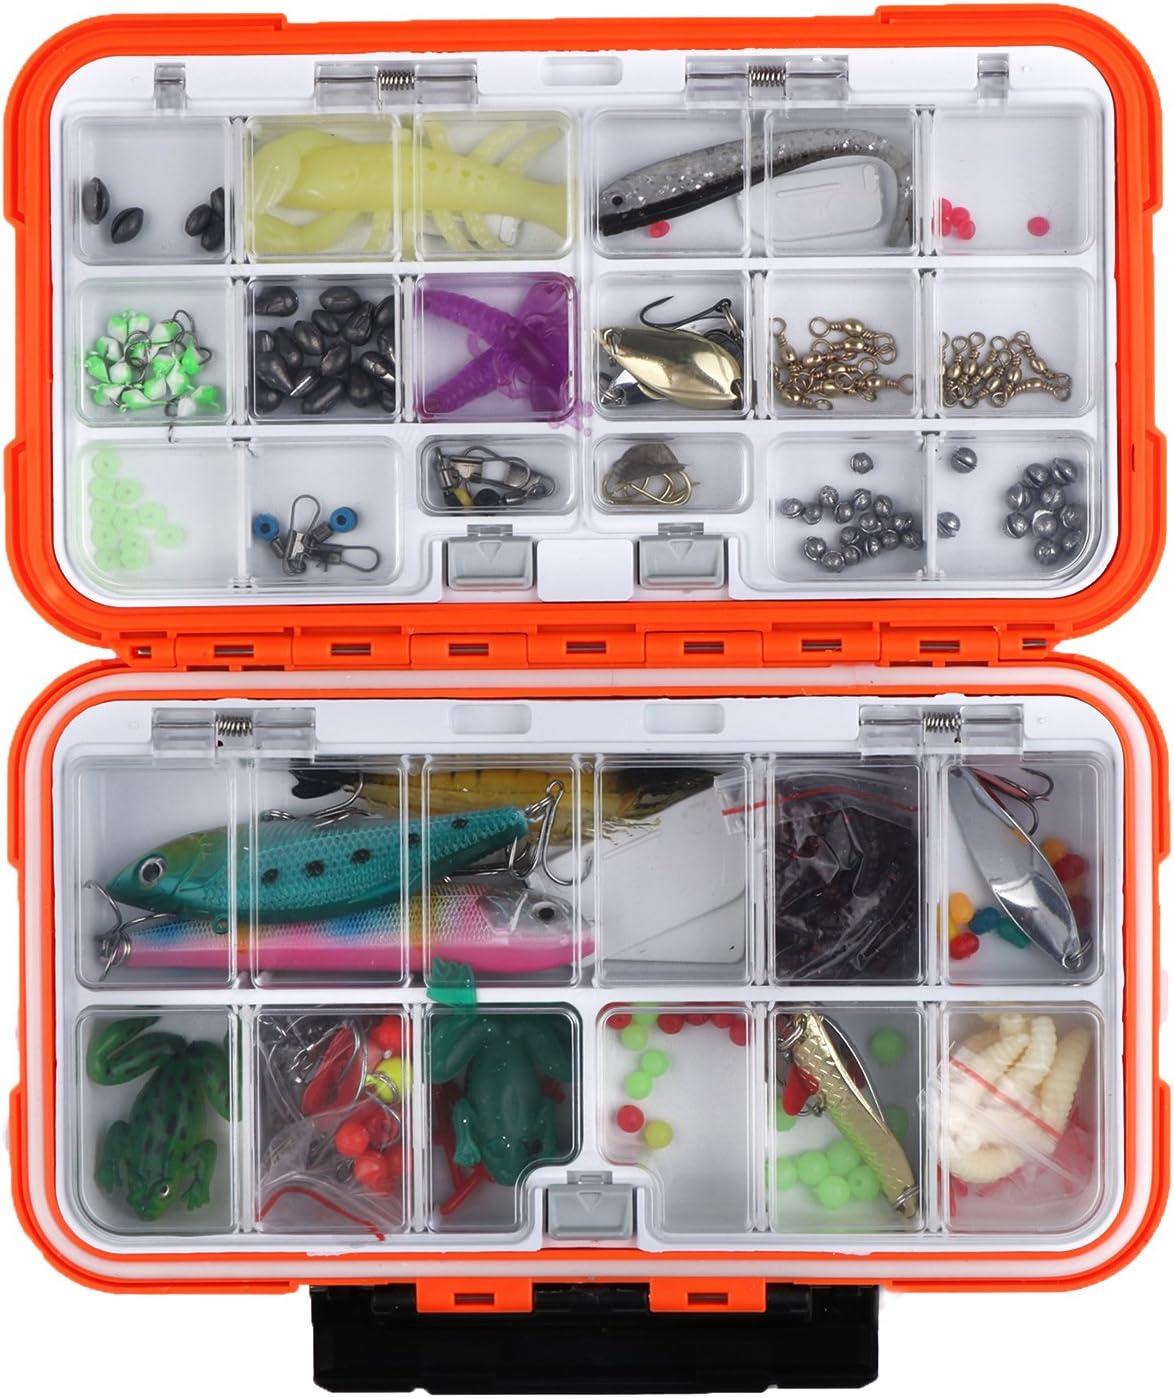 Goture Small Tackle Box, Waterproof Fishing Lure Boxes, Storage Case Bait  Plastic Accessories Containers Orange SMALL 7.8'' X 4.2'' X 1.8'' Orange  SMALL(Size: 7.8'' L X 4.2'' W X 1.8'' H)